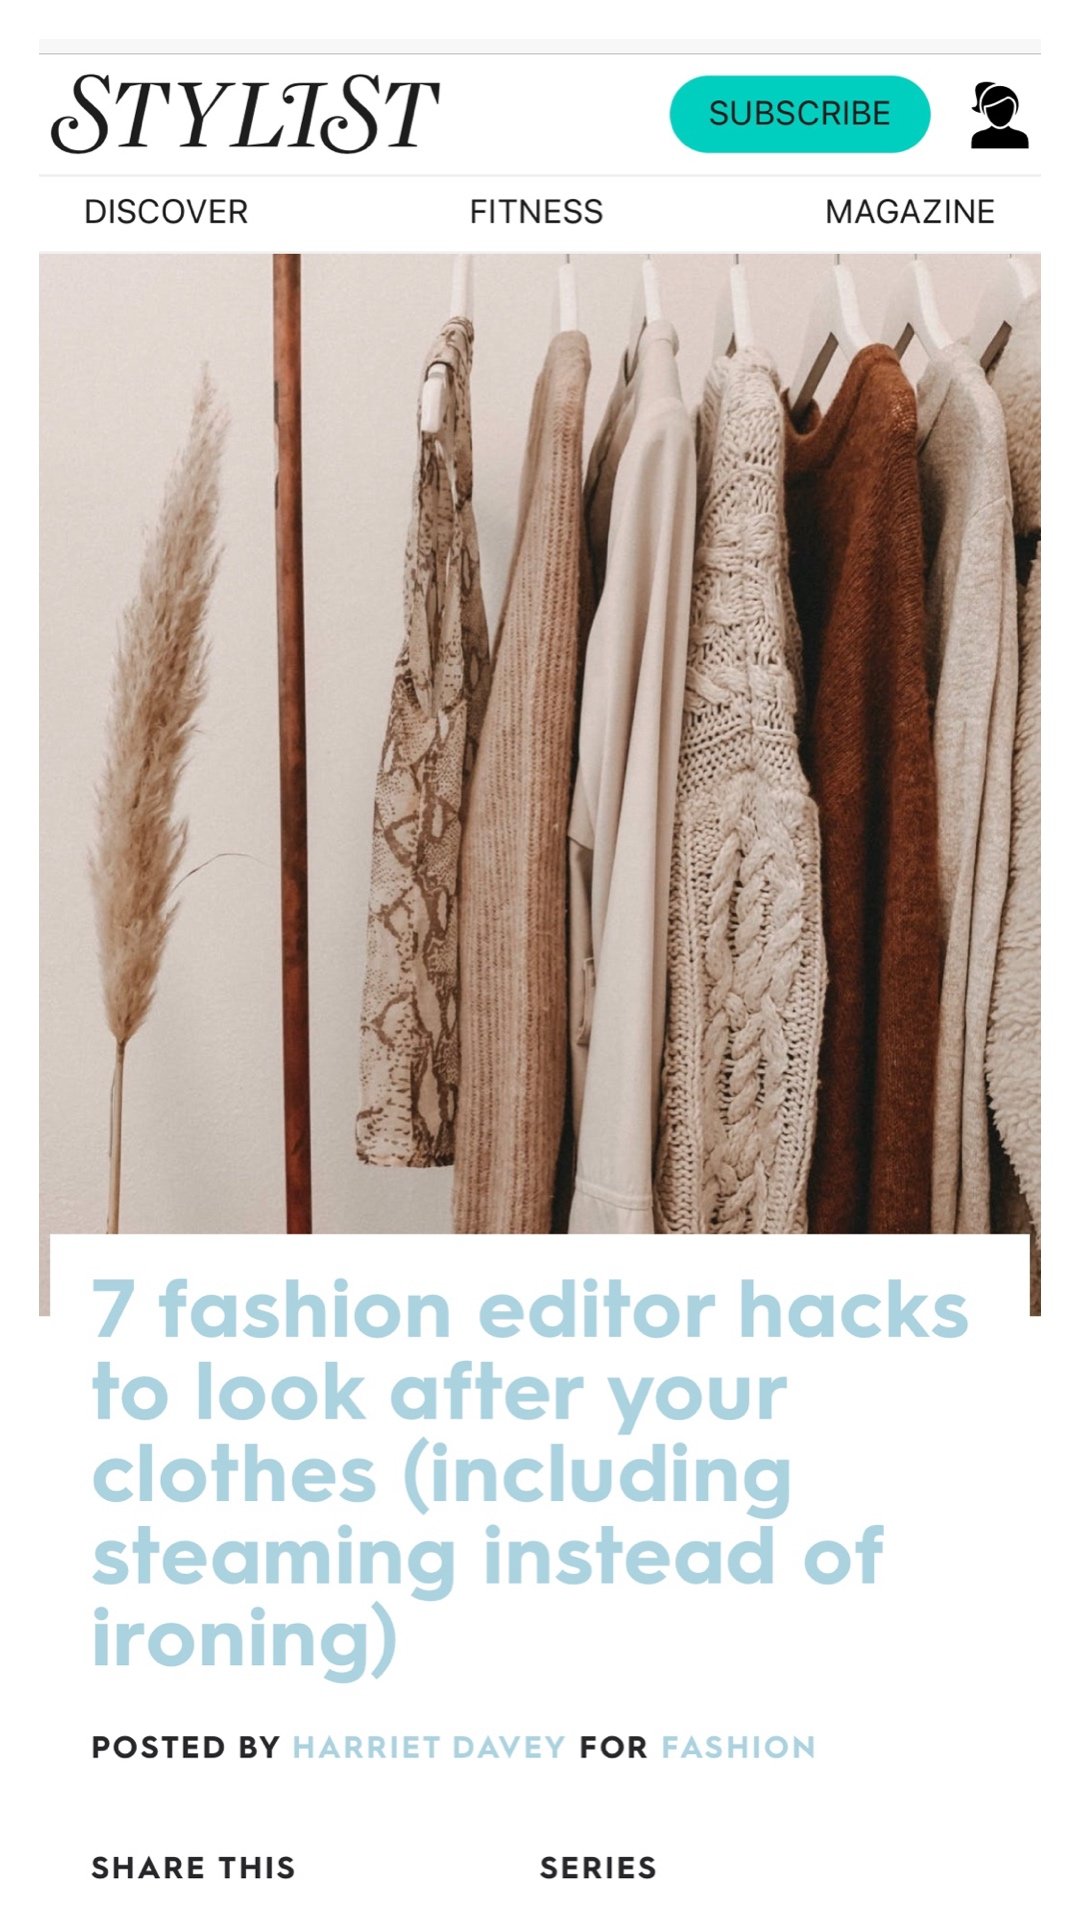 Stylist Article - How to look after your clothes hacks